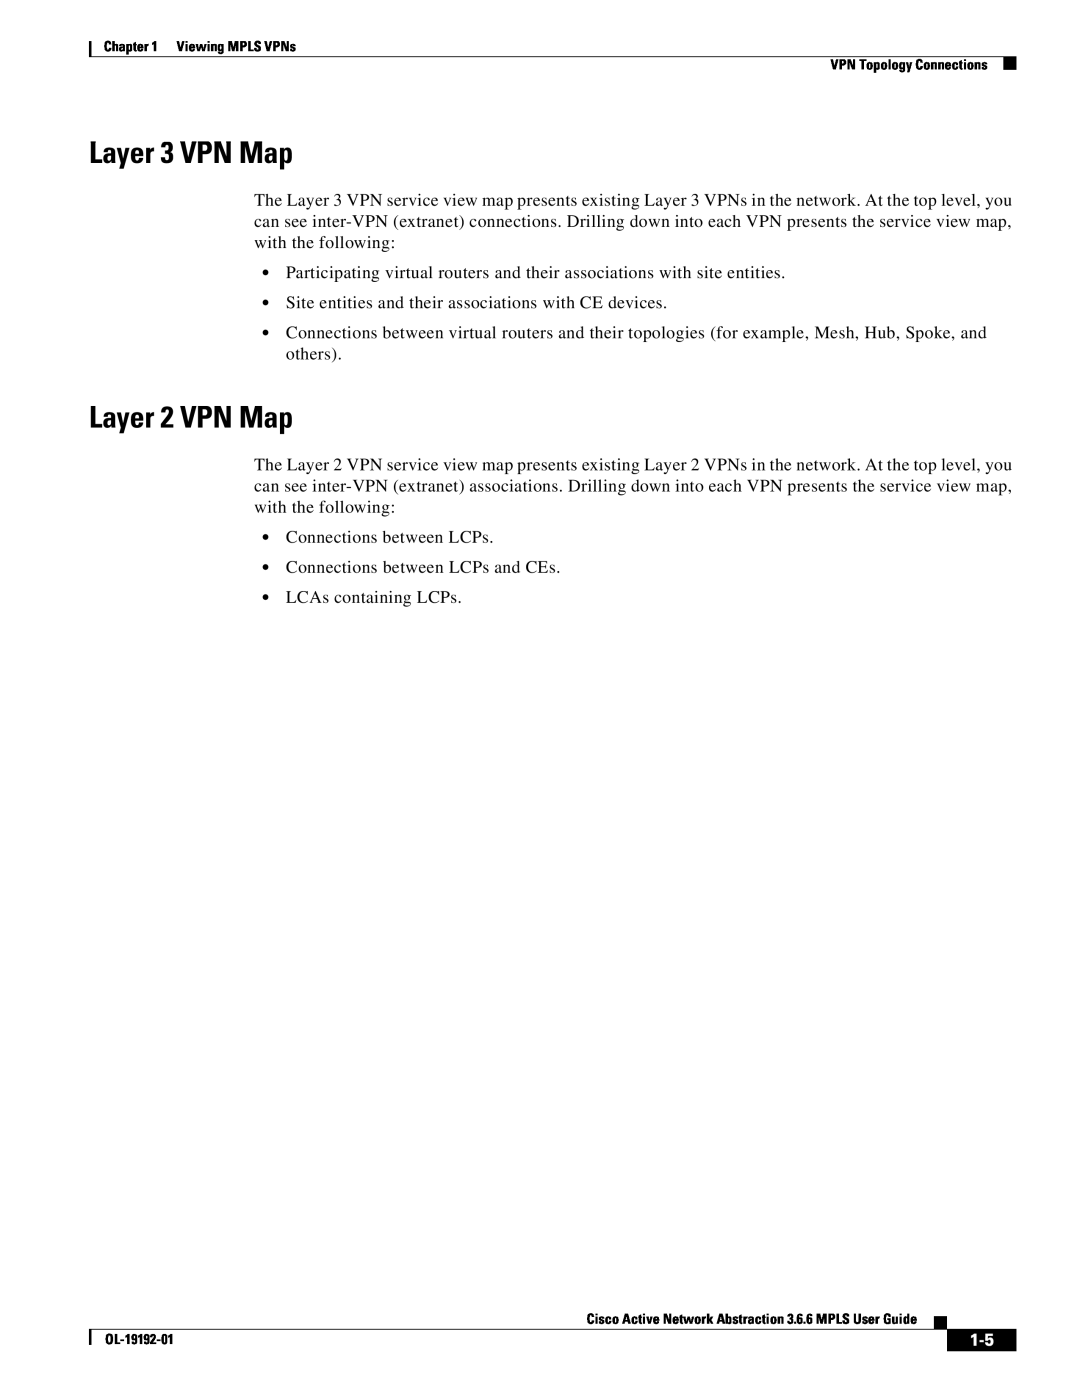 Cisco Systems 3.6.6 manual Layer 3 VPN Map, Layer 2 VPN Map 